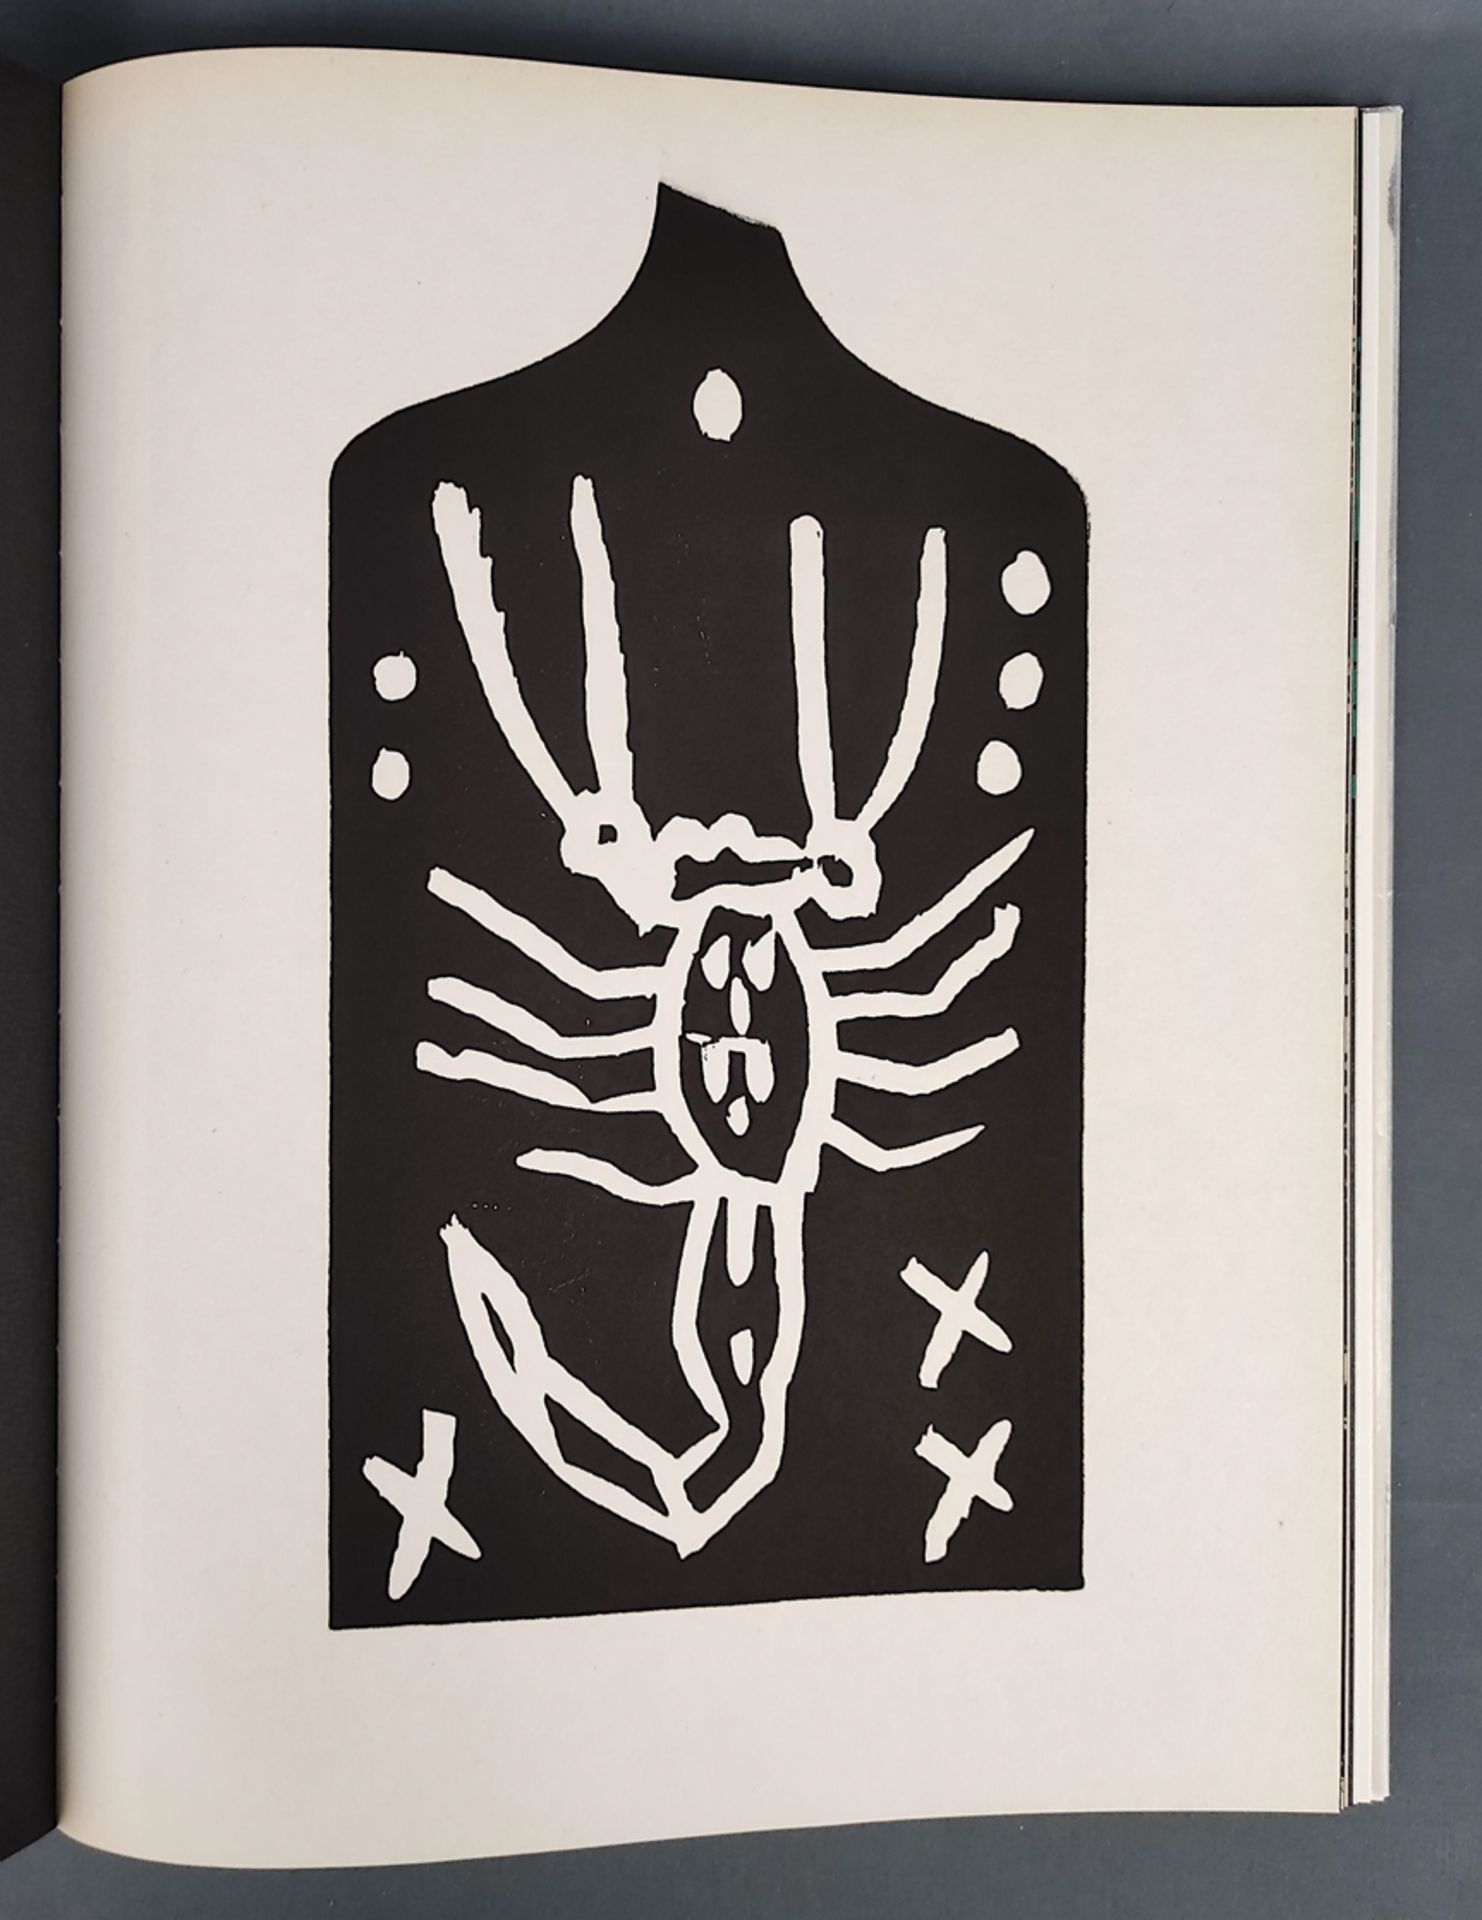 2 volumes "Krater und Wolke", consisting of no. 6 and no. 7, no. 6: Winkler, Ralf (A. R. Penck), ed - Image 8 of 12